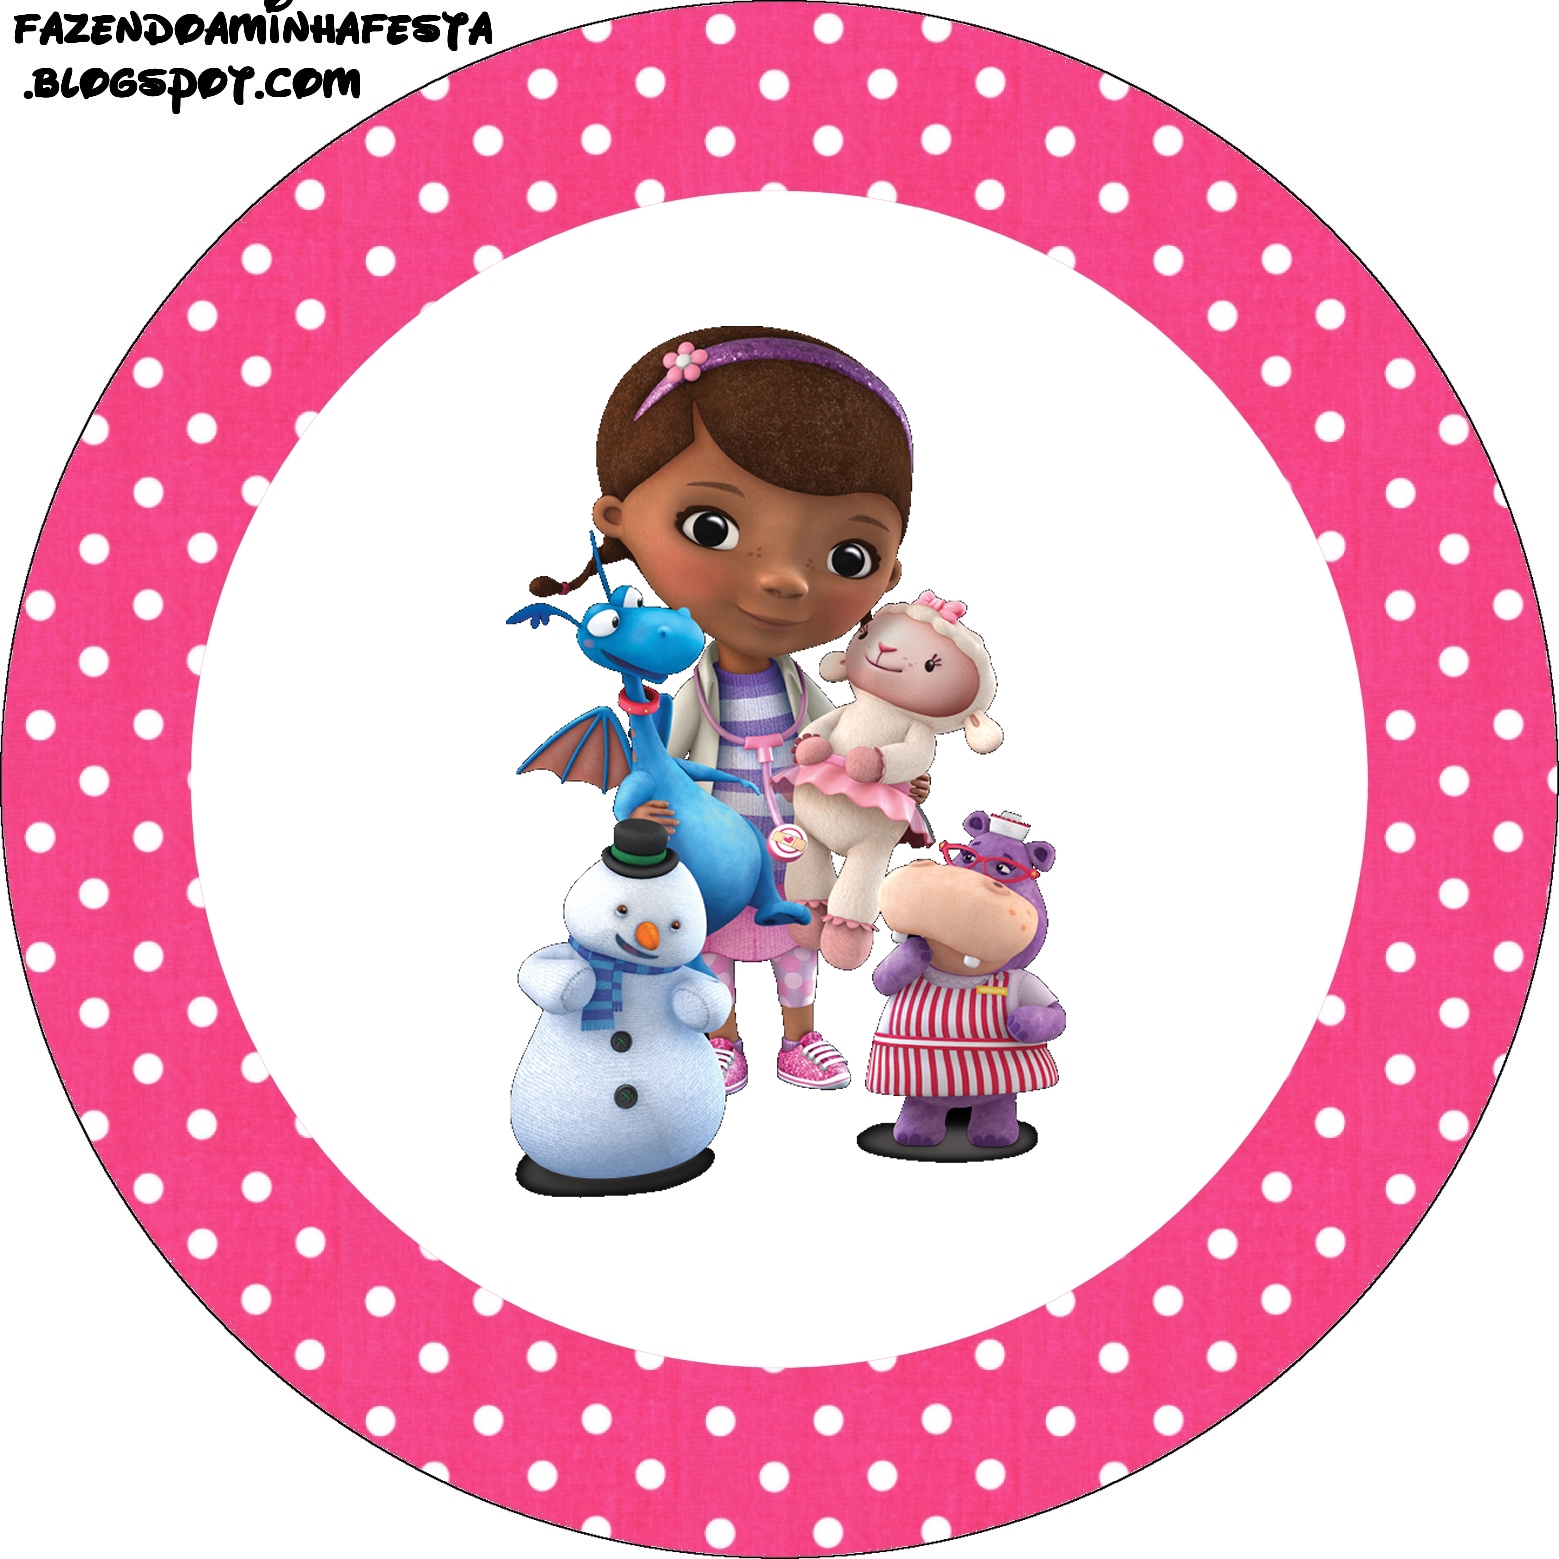 doc-mcstuffins-free-printable-candy-buffet-labels-oh-my-fiesta-in